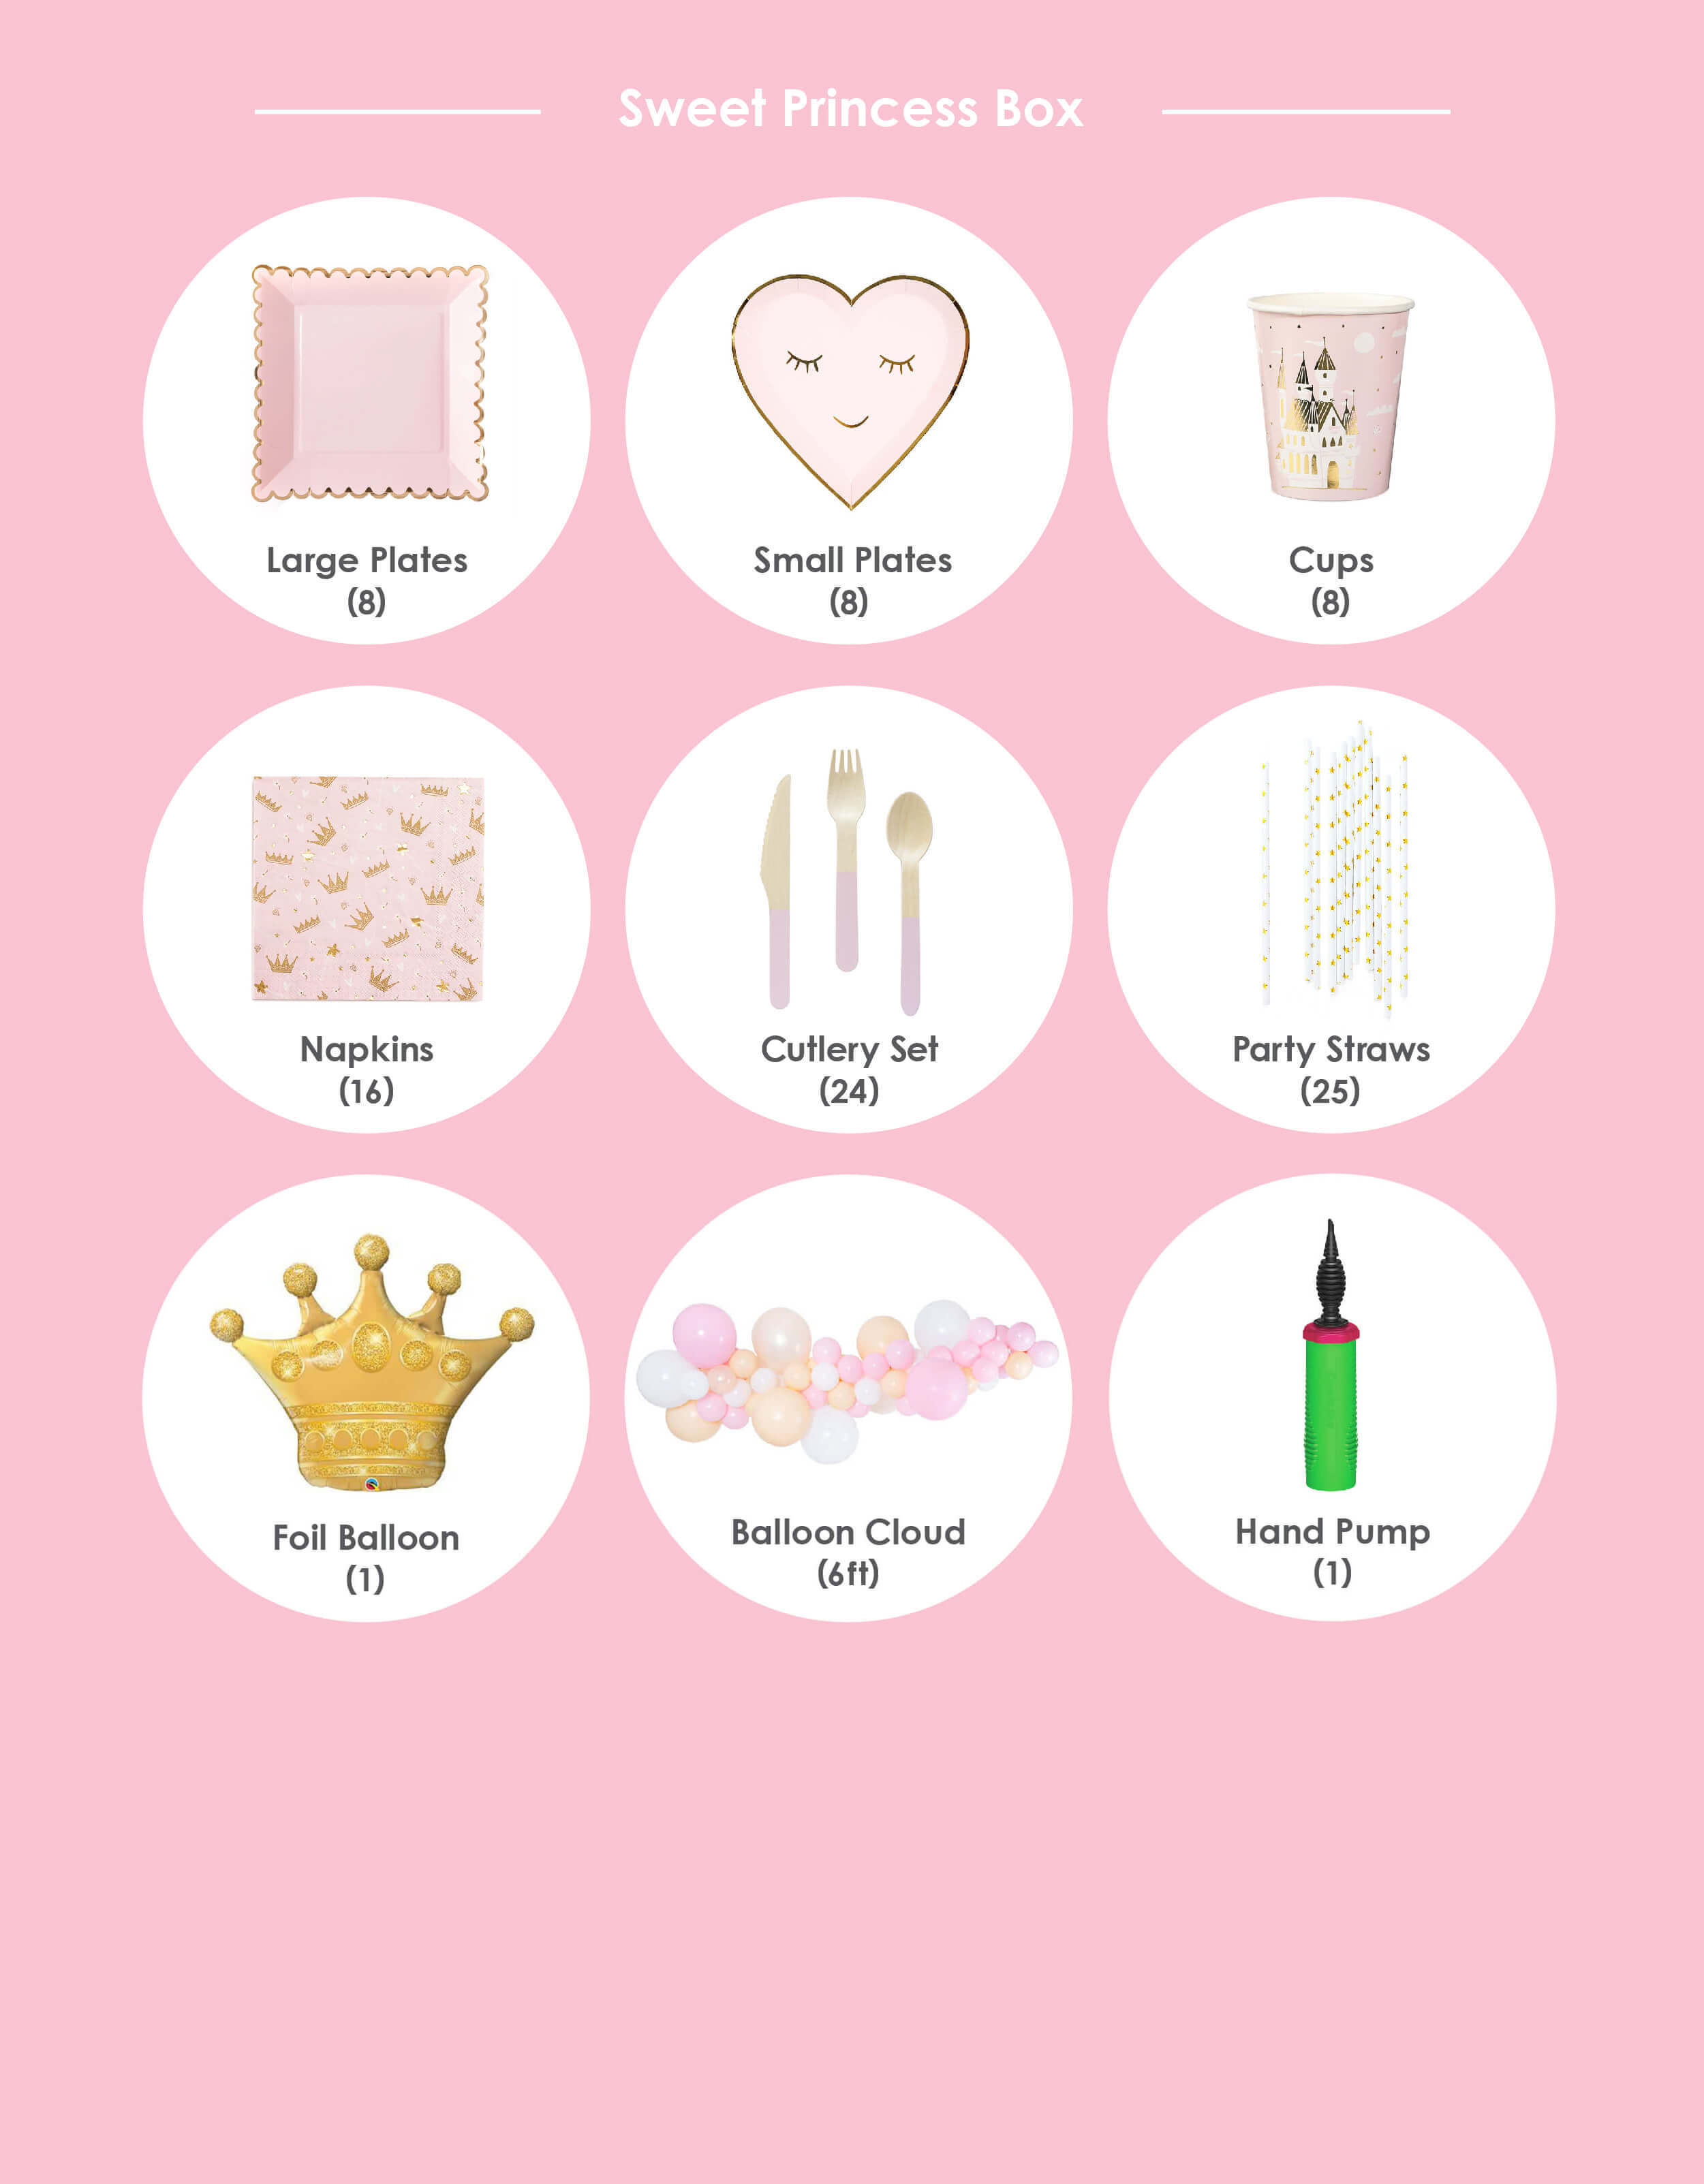 Momo party - Sweet Princess Party Box Kit, item list included: My mind's eye Blush Large Plates, Blushing Heart Small Plates, Sweet Princess Cups, Sweet Princess Napkins, Soft Pink Wooden Cutlery Set, Gold Star Party Straws, 41” Gold Crown Foil Mylar Balloon, Sweet Princess 6-foot Balloon Cloud with hand pump. Modern party supplies for you diy birthday party set up at home.